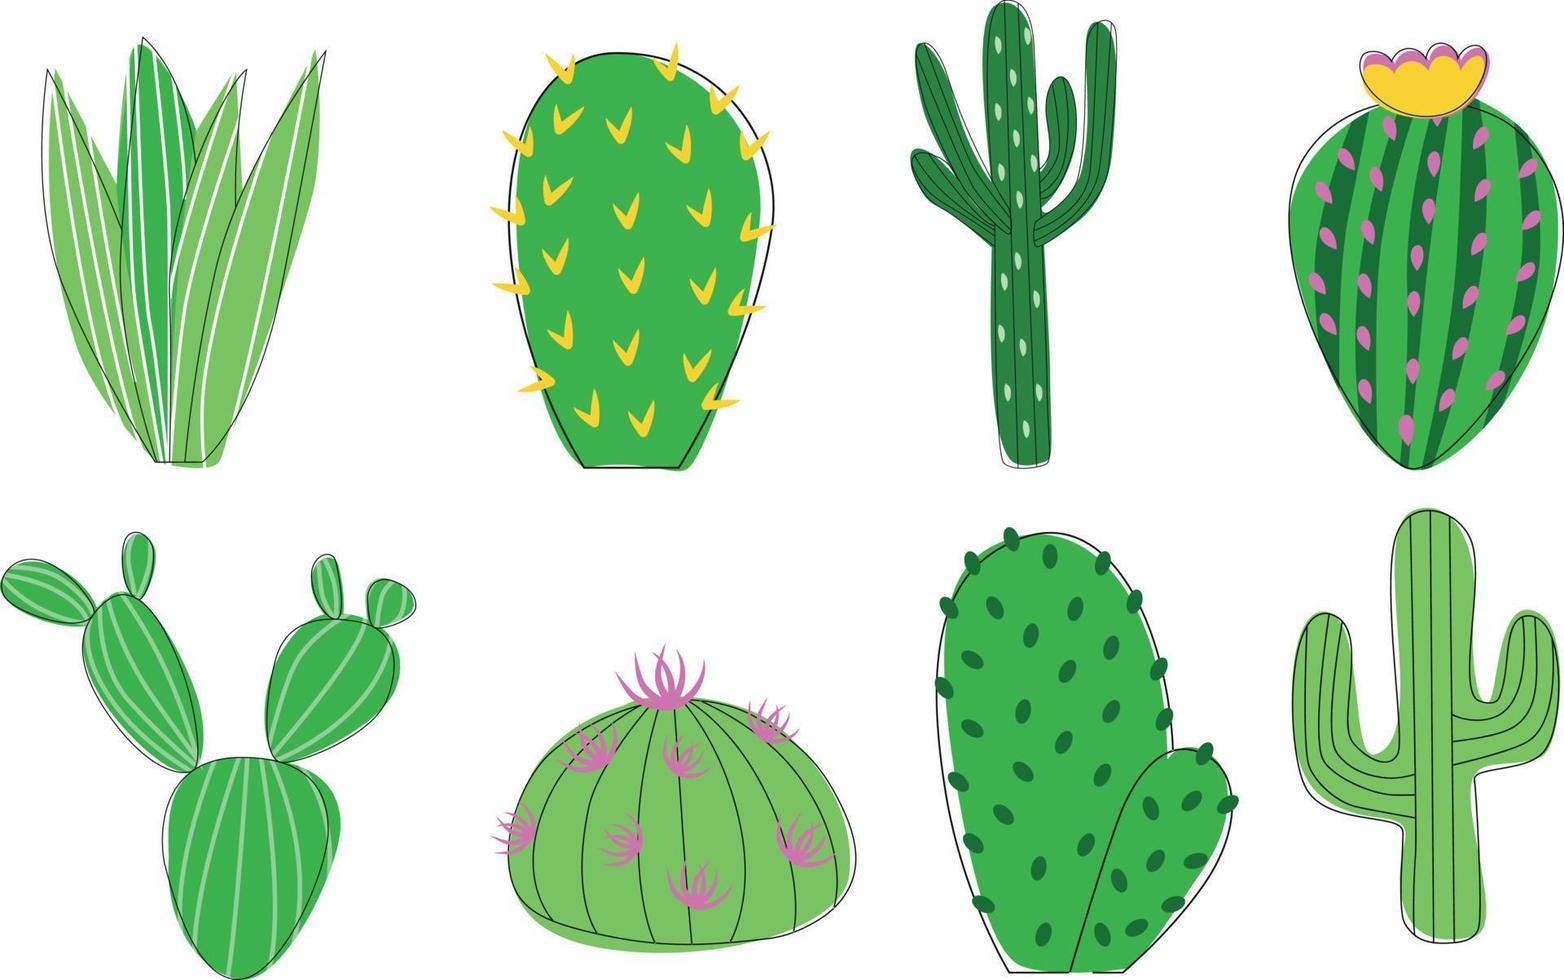 Set of cacti vector illustration, flat style cactus and succulents on white background